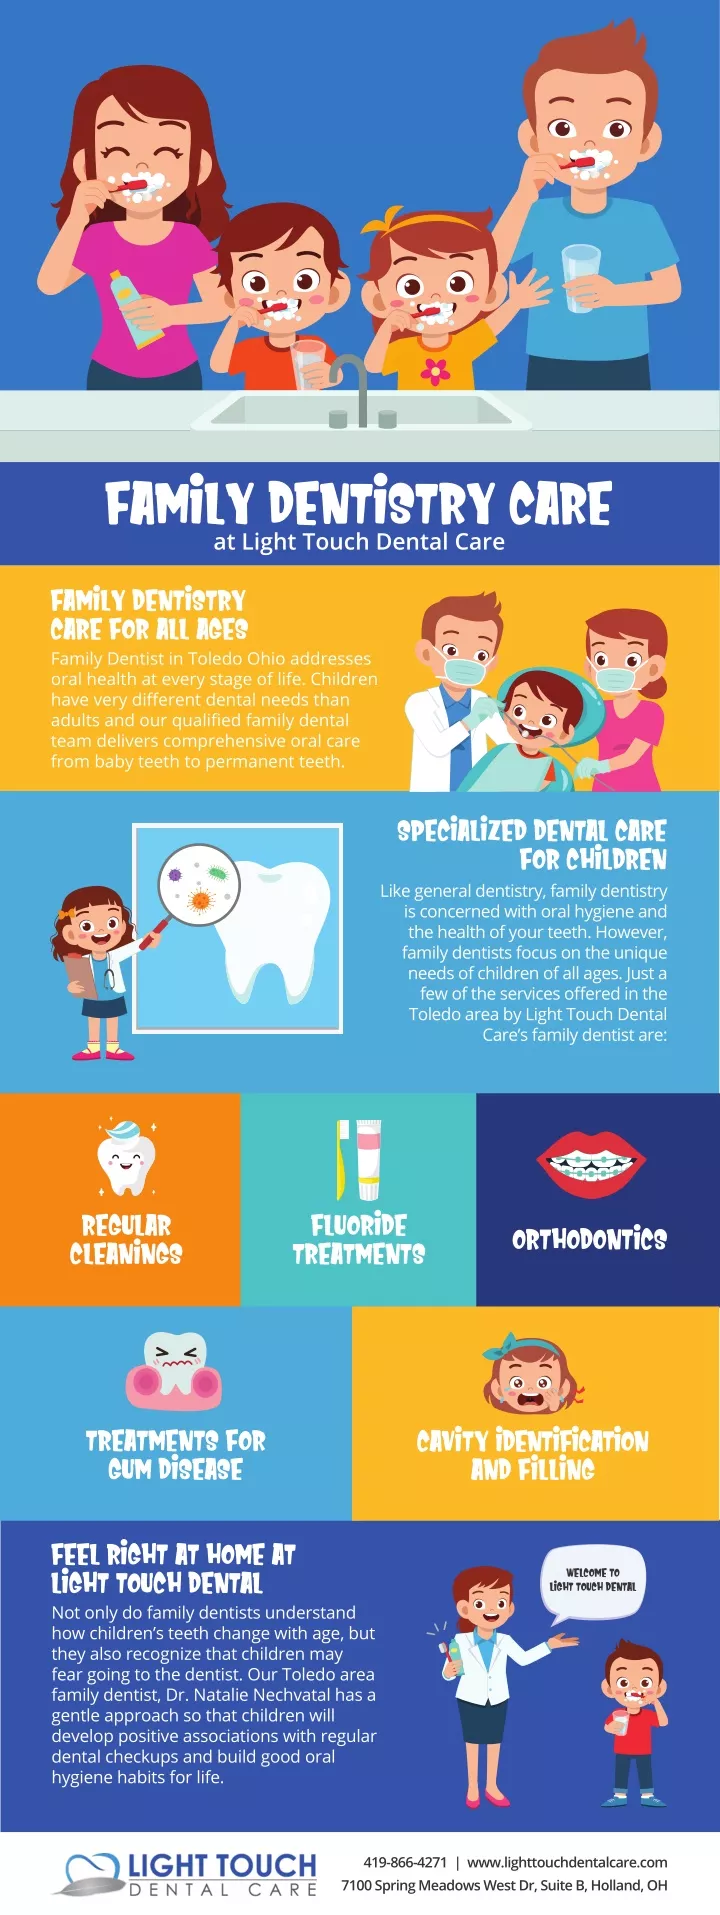 family dentistry care at light touch dental care